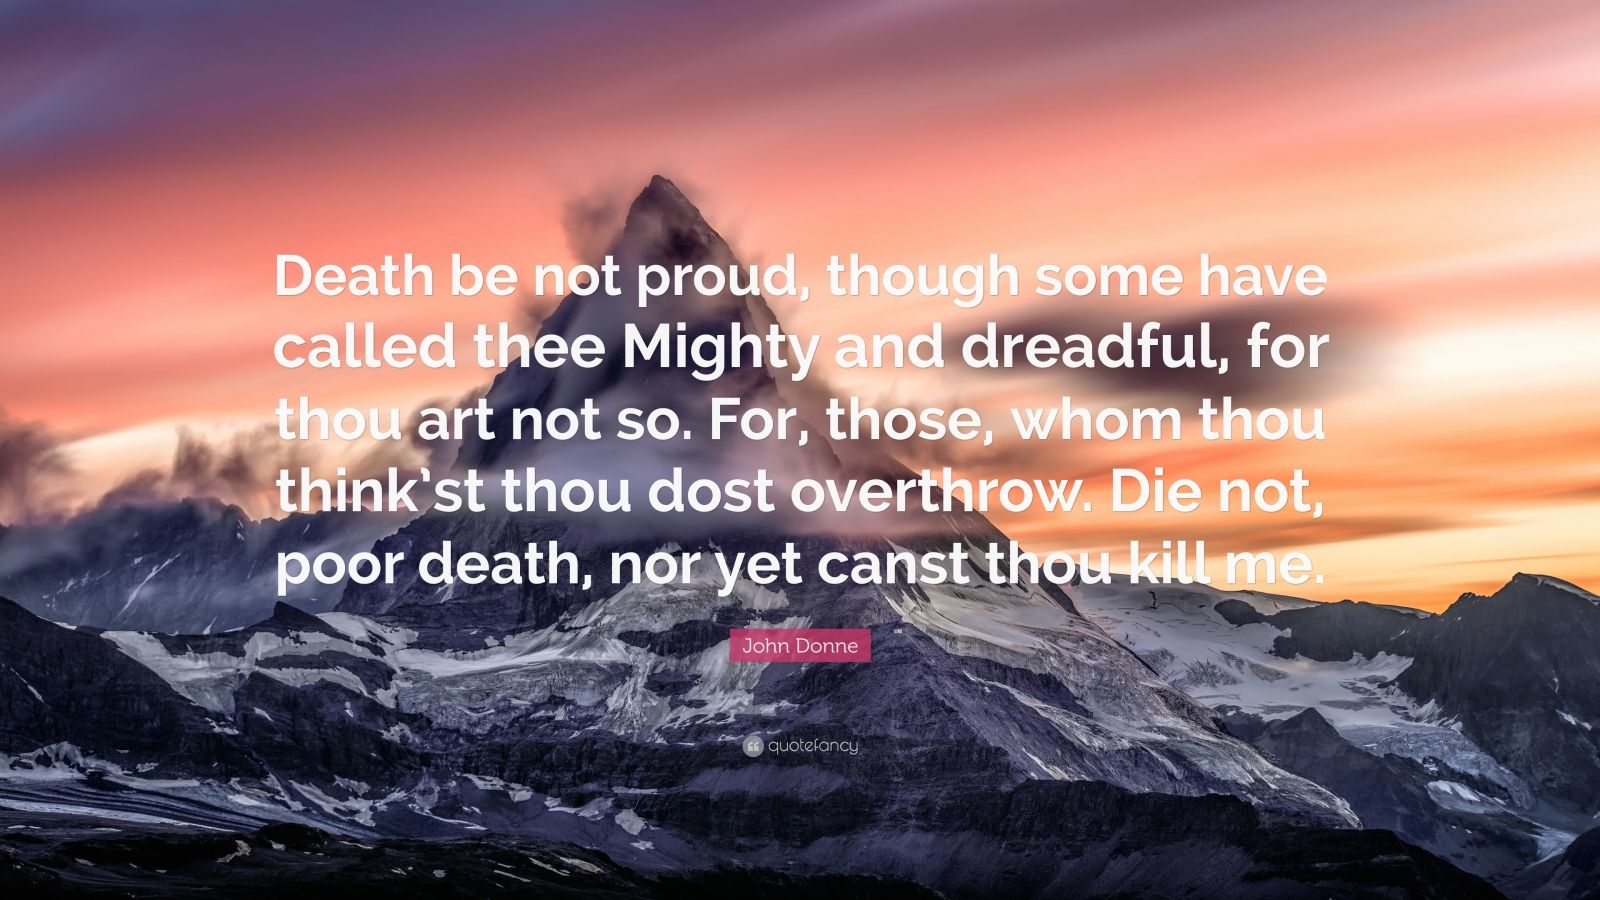 John Donne Quote: “Death be not proud, though some have called thee ...